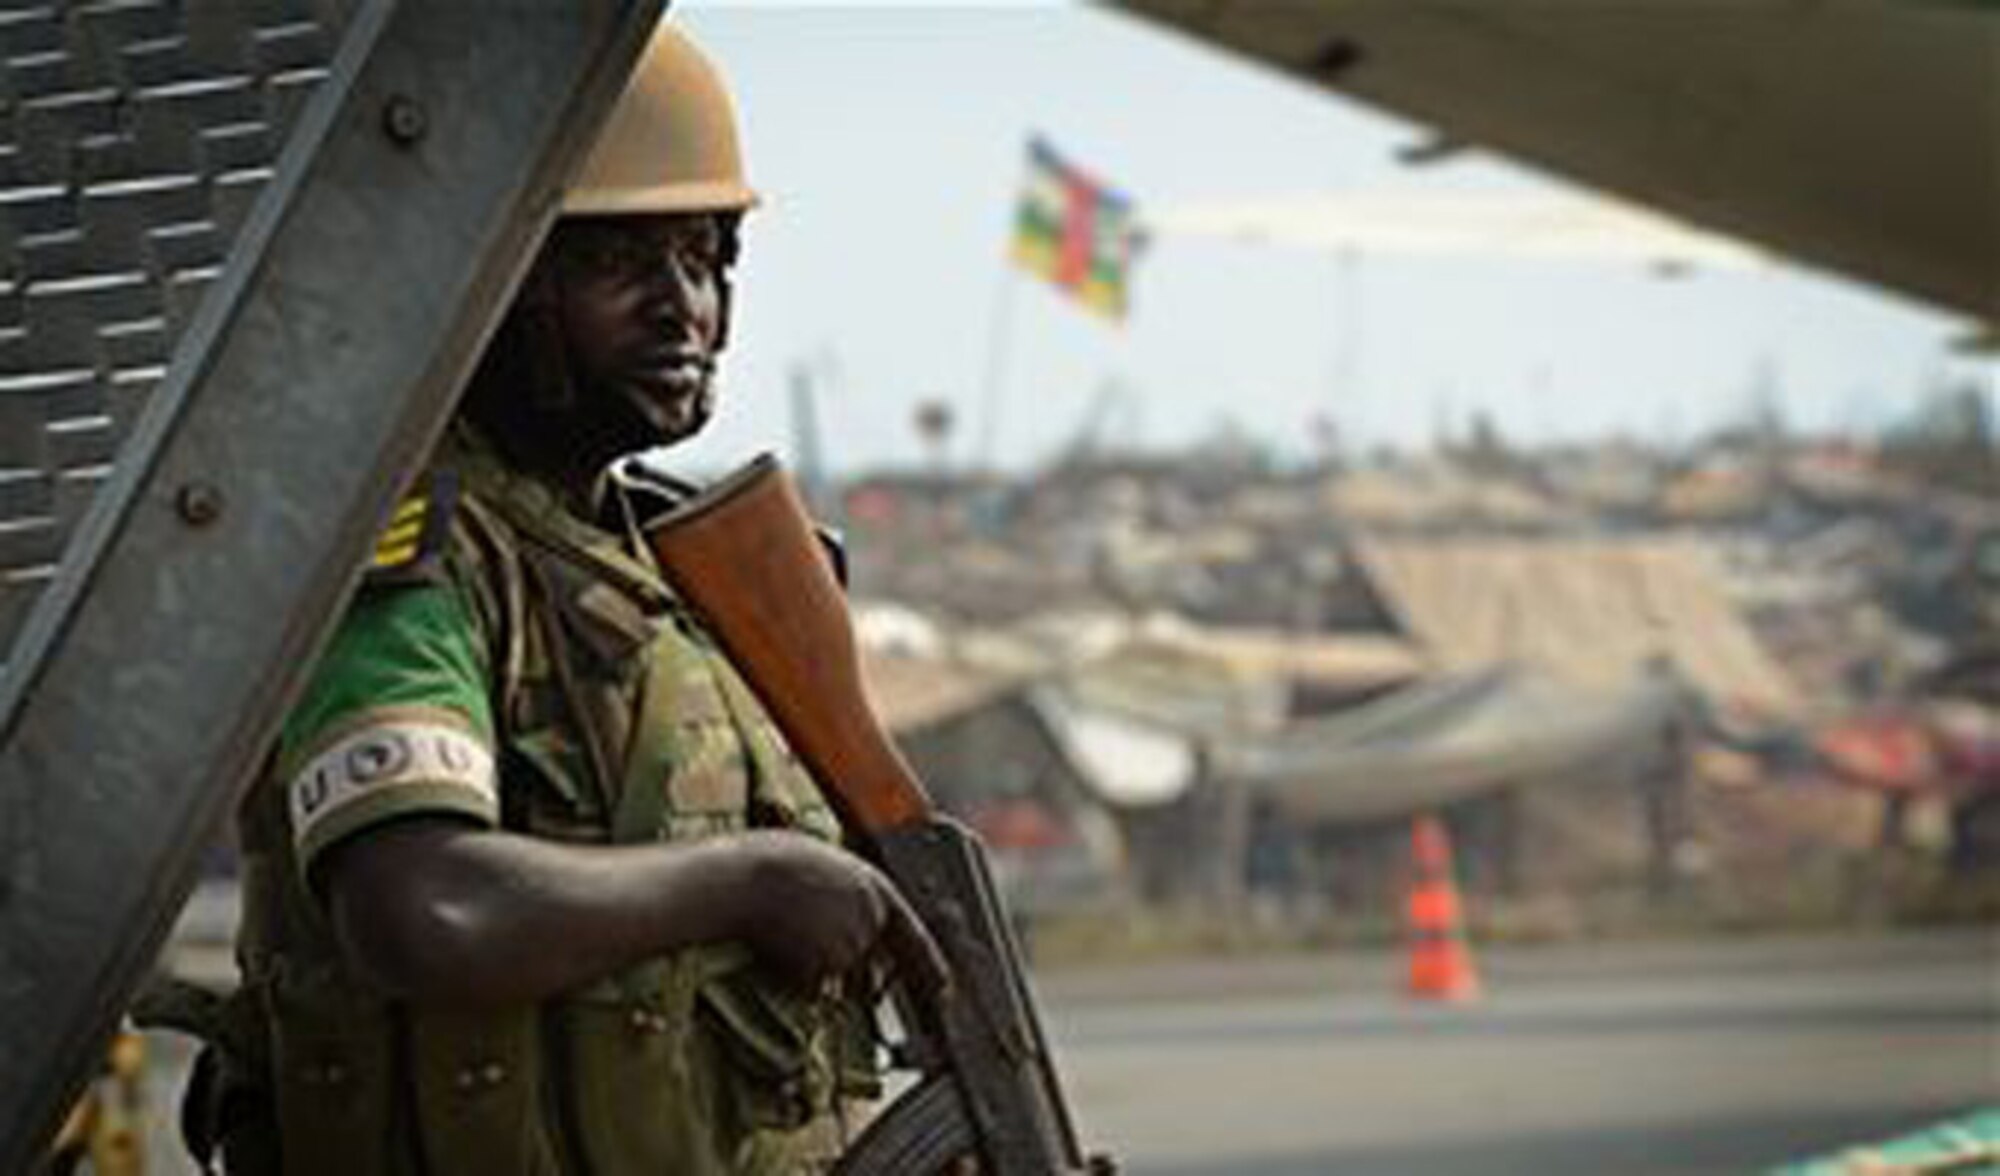 A Rwandan soldier stands guard at an airfield in the Central African Republic with a refugee camp full of displaced citizens behind him Jan. 19, 2014. U.S. forces will transport a total number of 850 Rwandan soldiers and more than 1,000 tons of equipment into the Central African Republic to aid French and African Union operations against militants during this three week-long operation. (U.S. Air Force photo/ Staff Sgt. Ryan Crane)